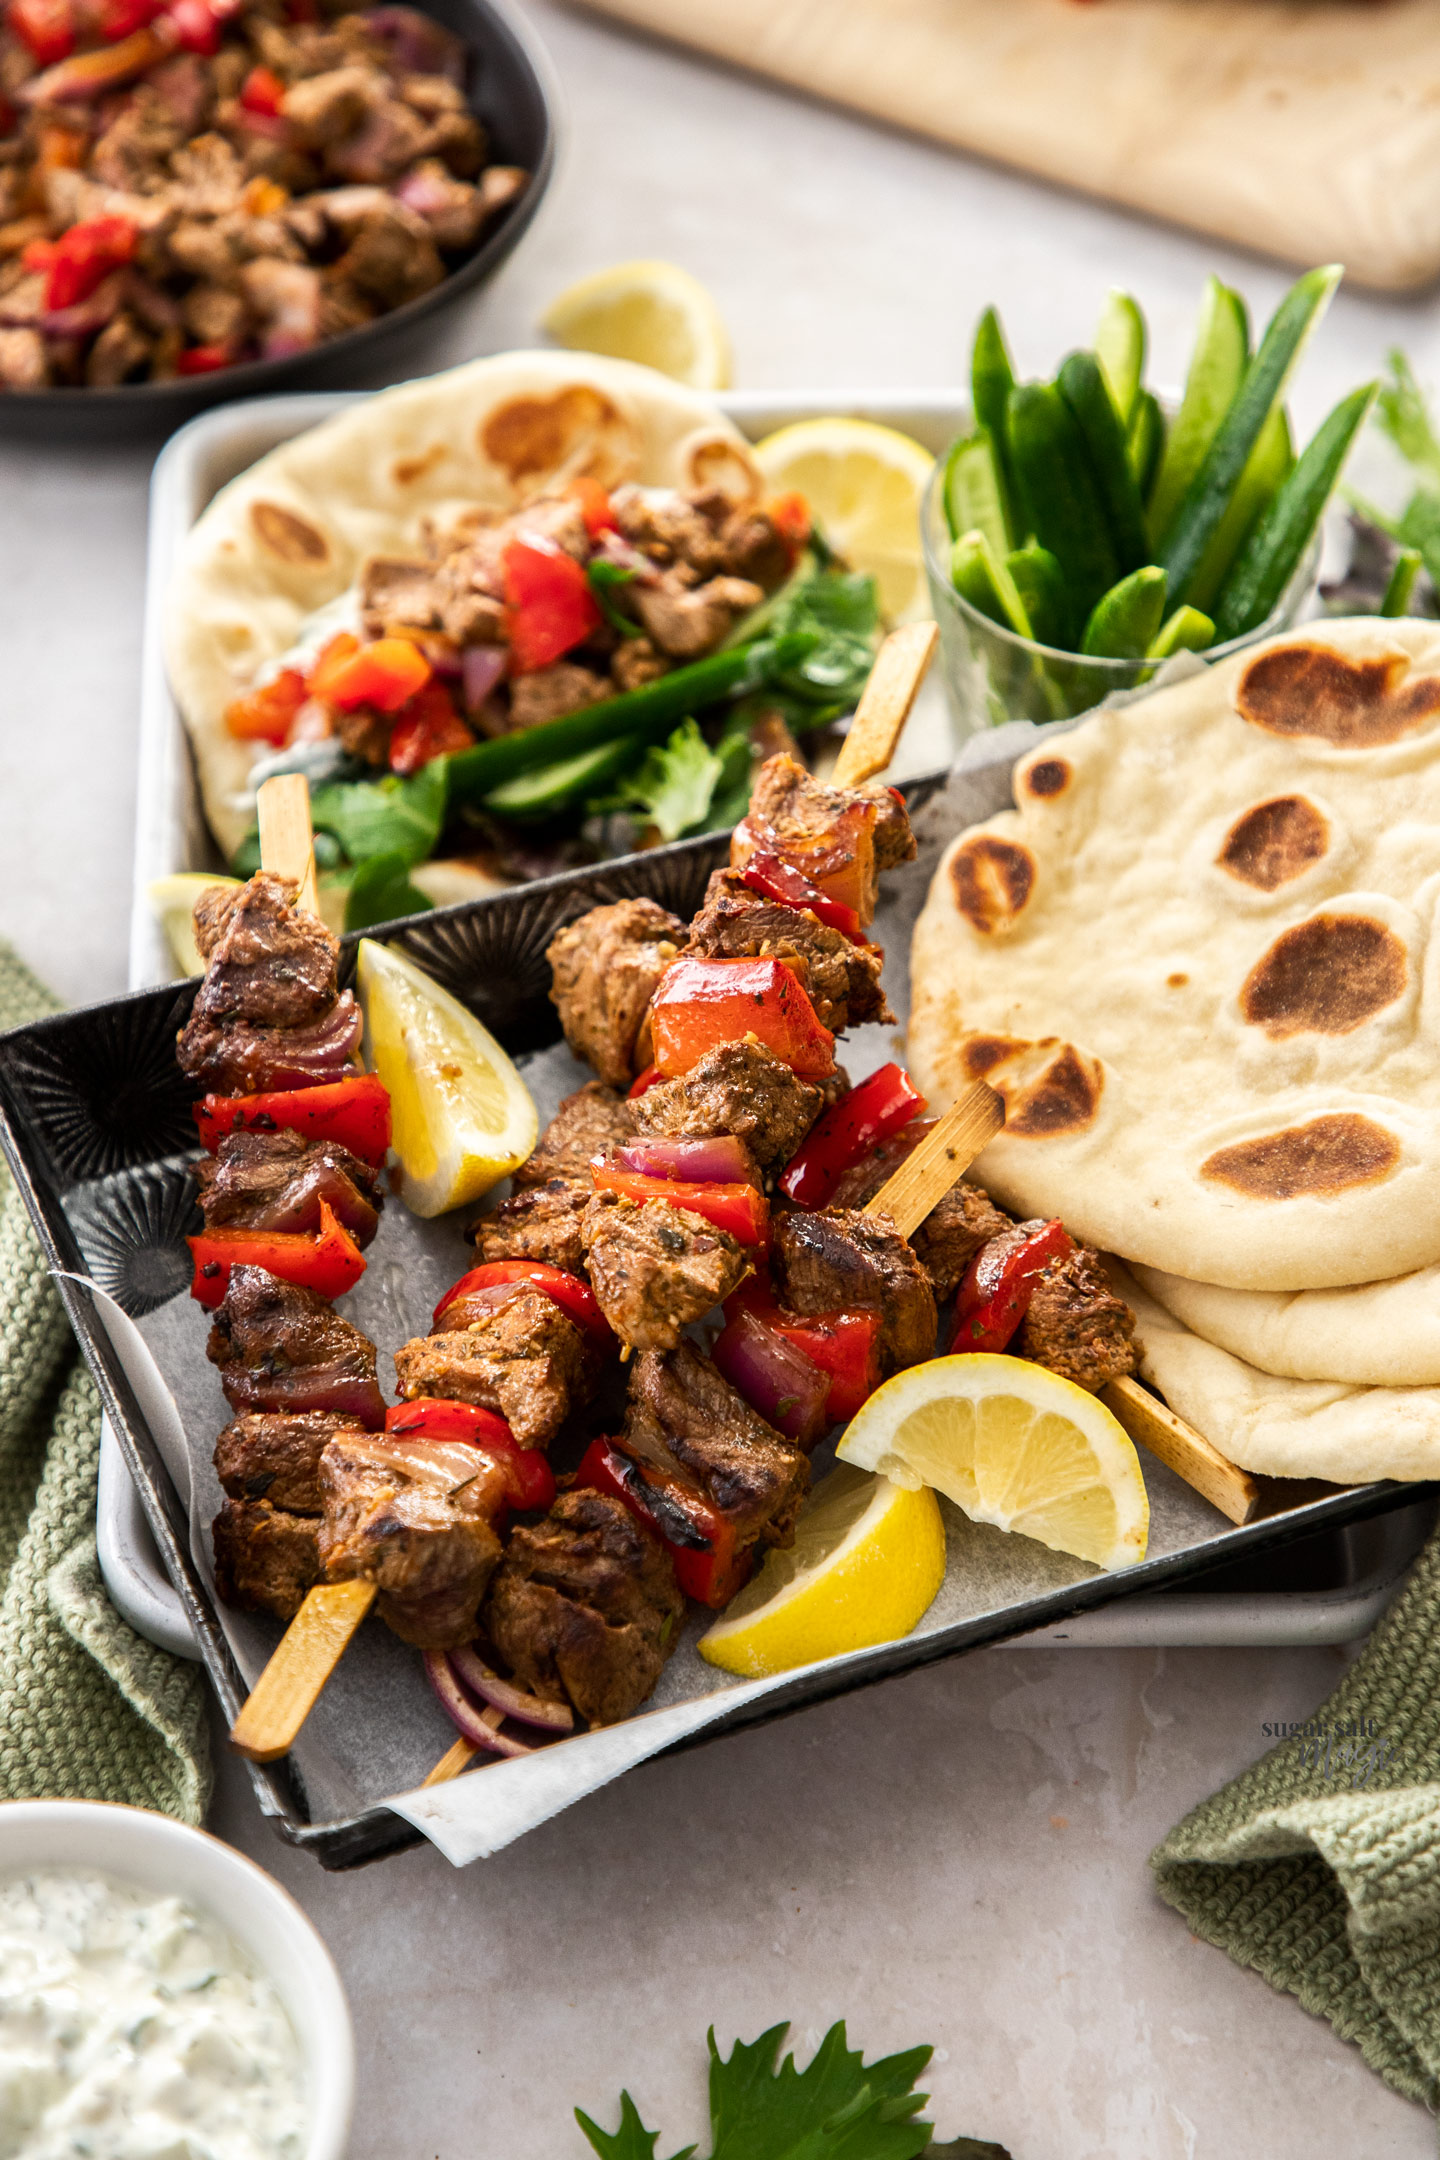 Lamb kebabs on a tray with pita bread.